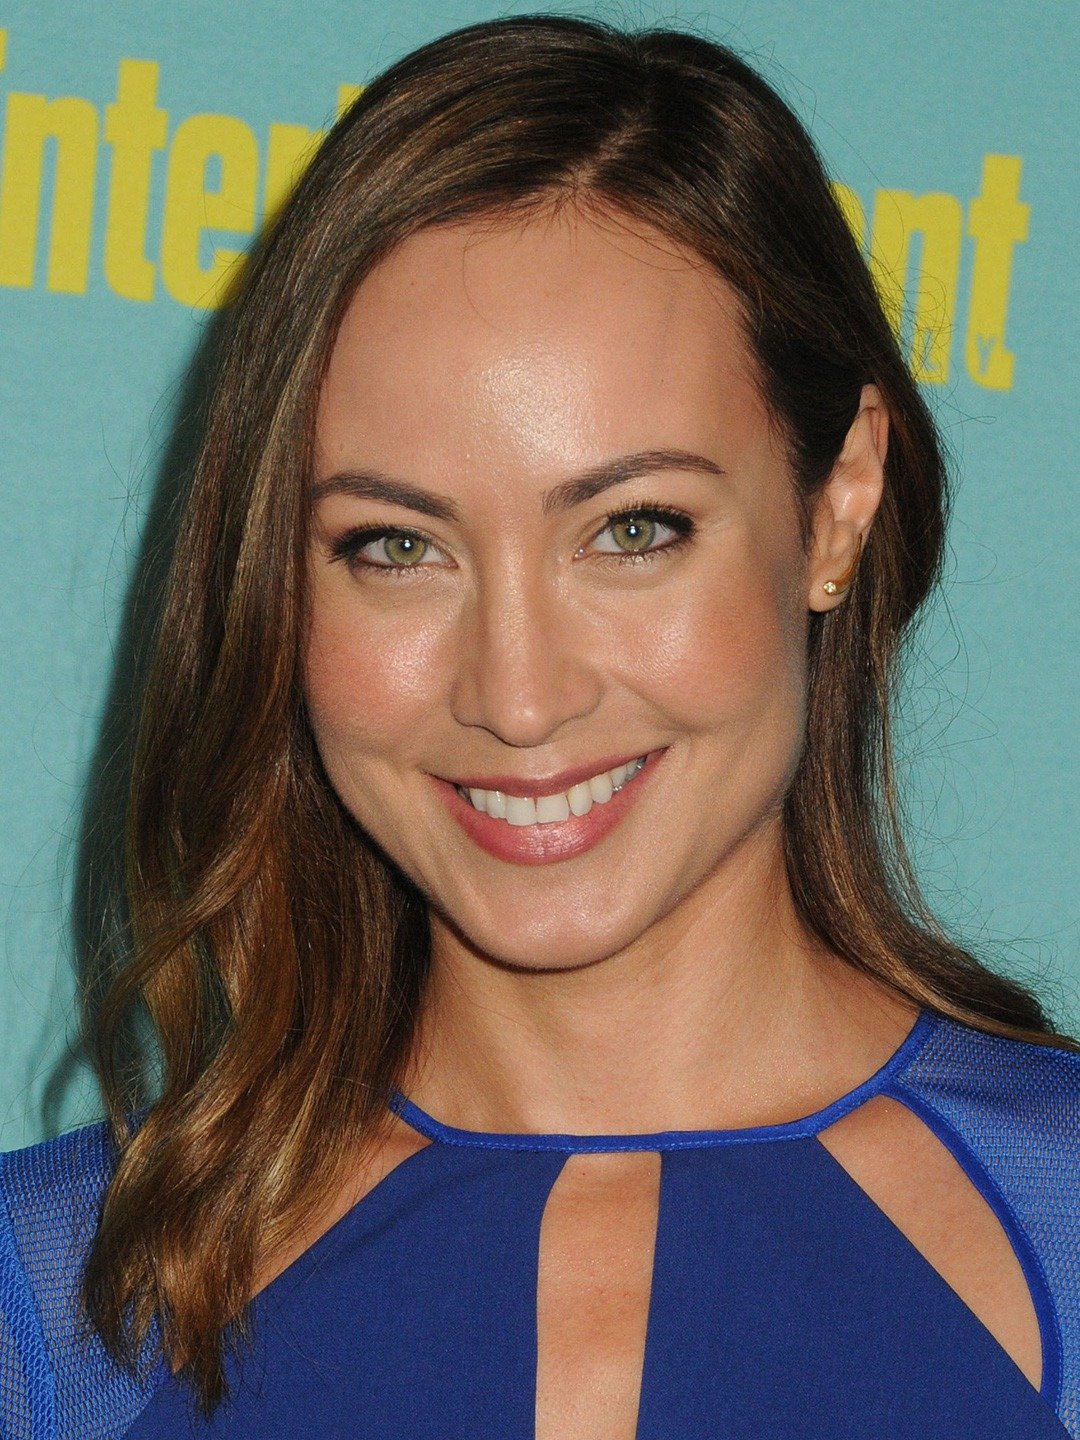 Courtney ford sex